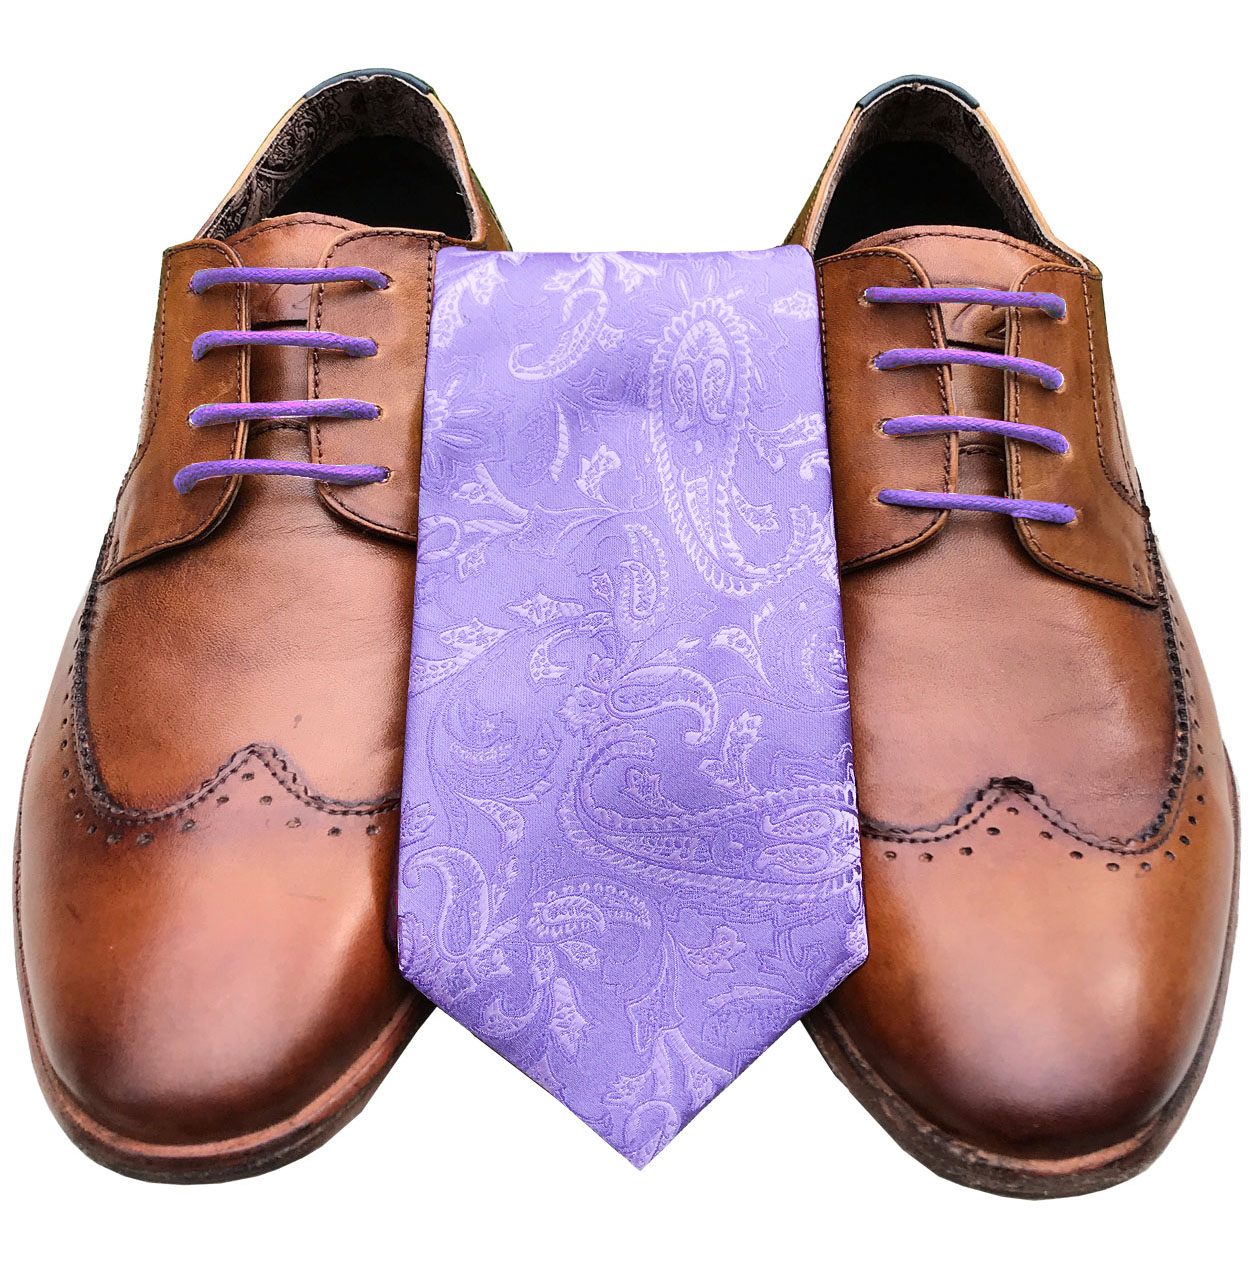 new-purple-tie-and-lace-1.jpg